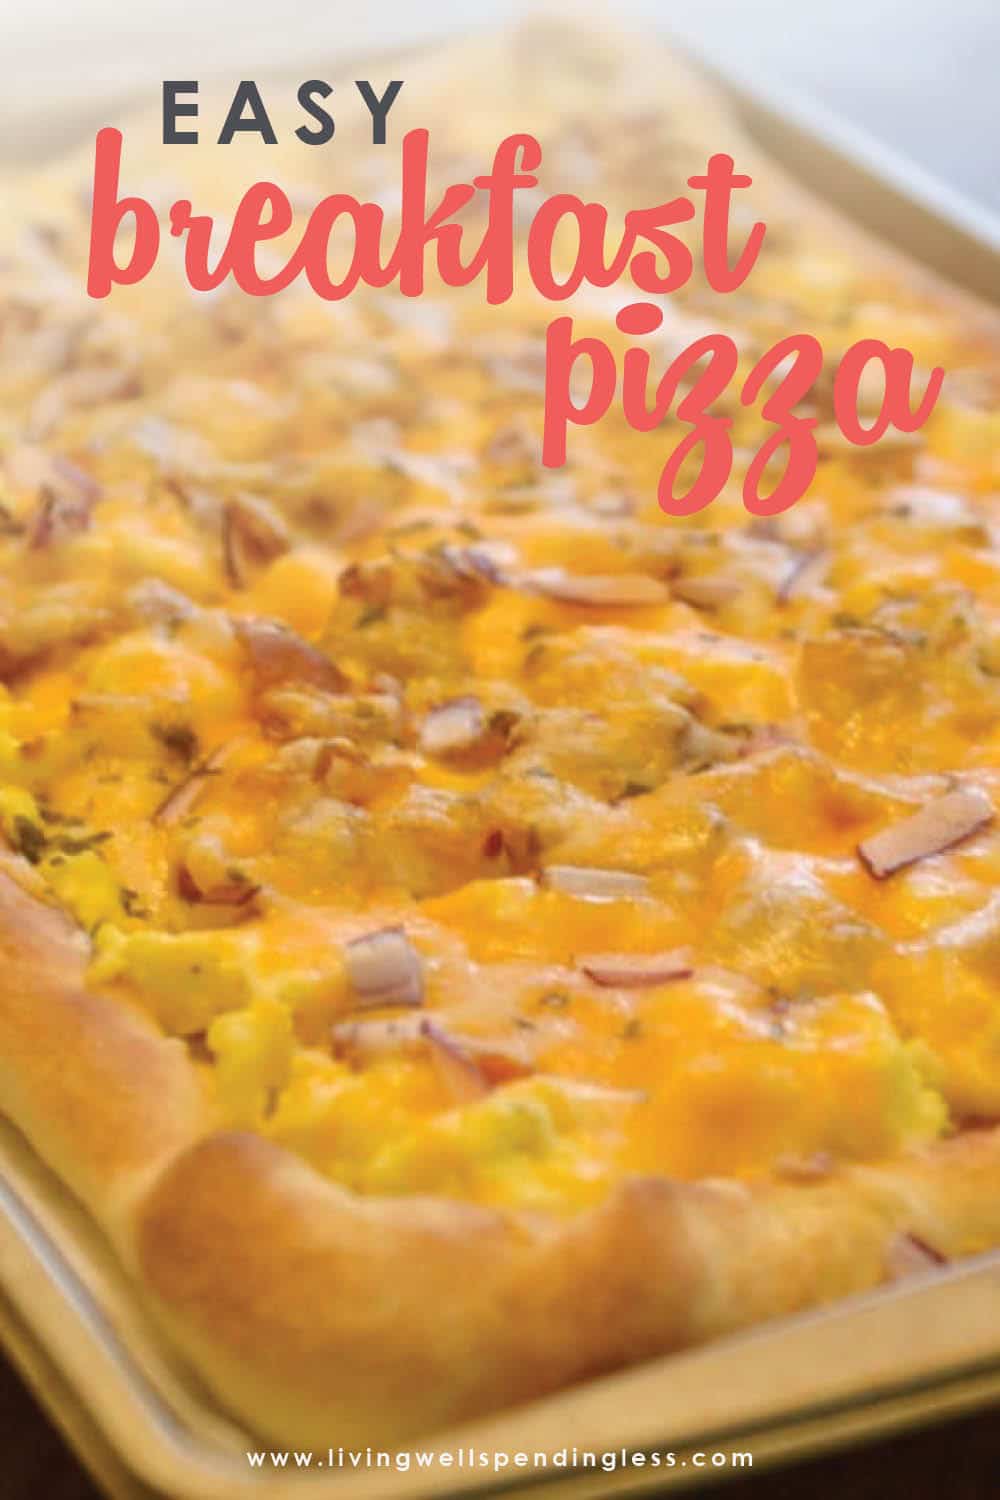 Ready for a fun way to mix up the most important meal of the day? This easy breakfast pizza recipe combines all your favorites into one tasty dish! #healthybreakfast #pizza #breakfast #breakfastpizza #eggs #quickbreakfast #foodmadesimple #recipes #breakfastrecipes #pizzarecipes